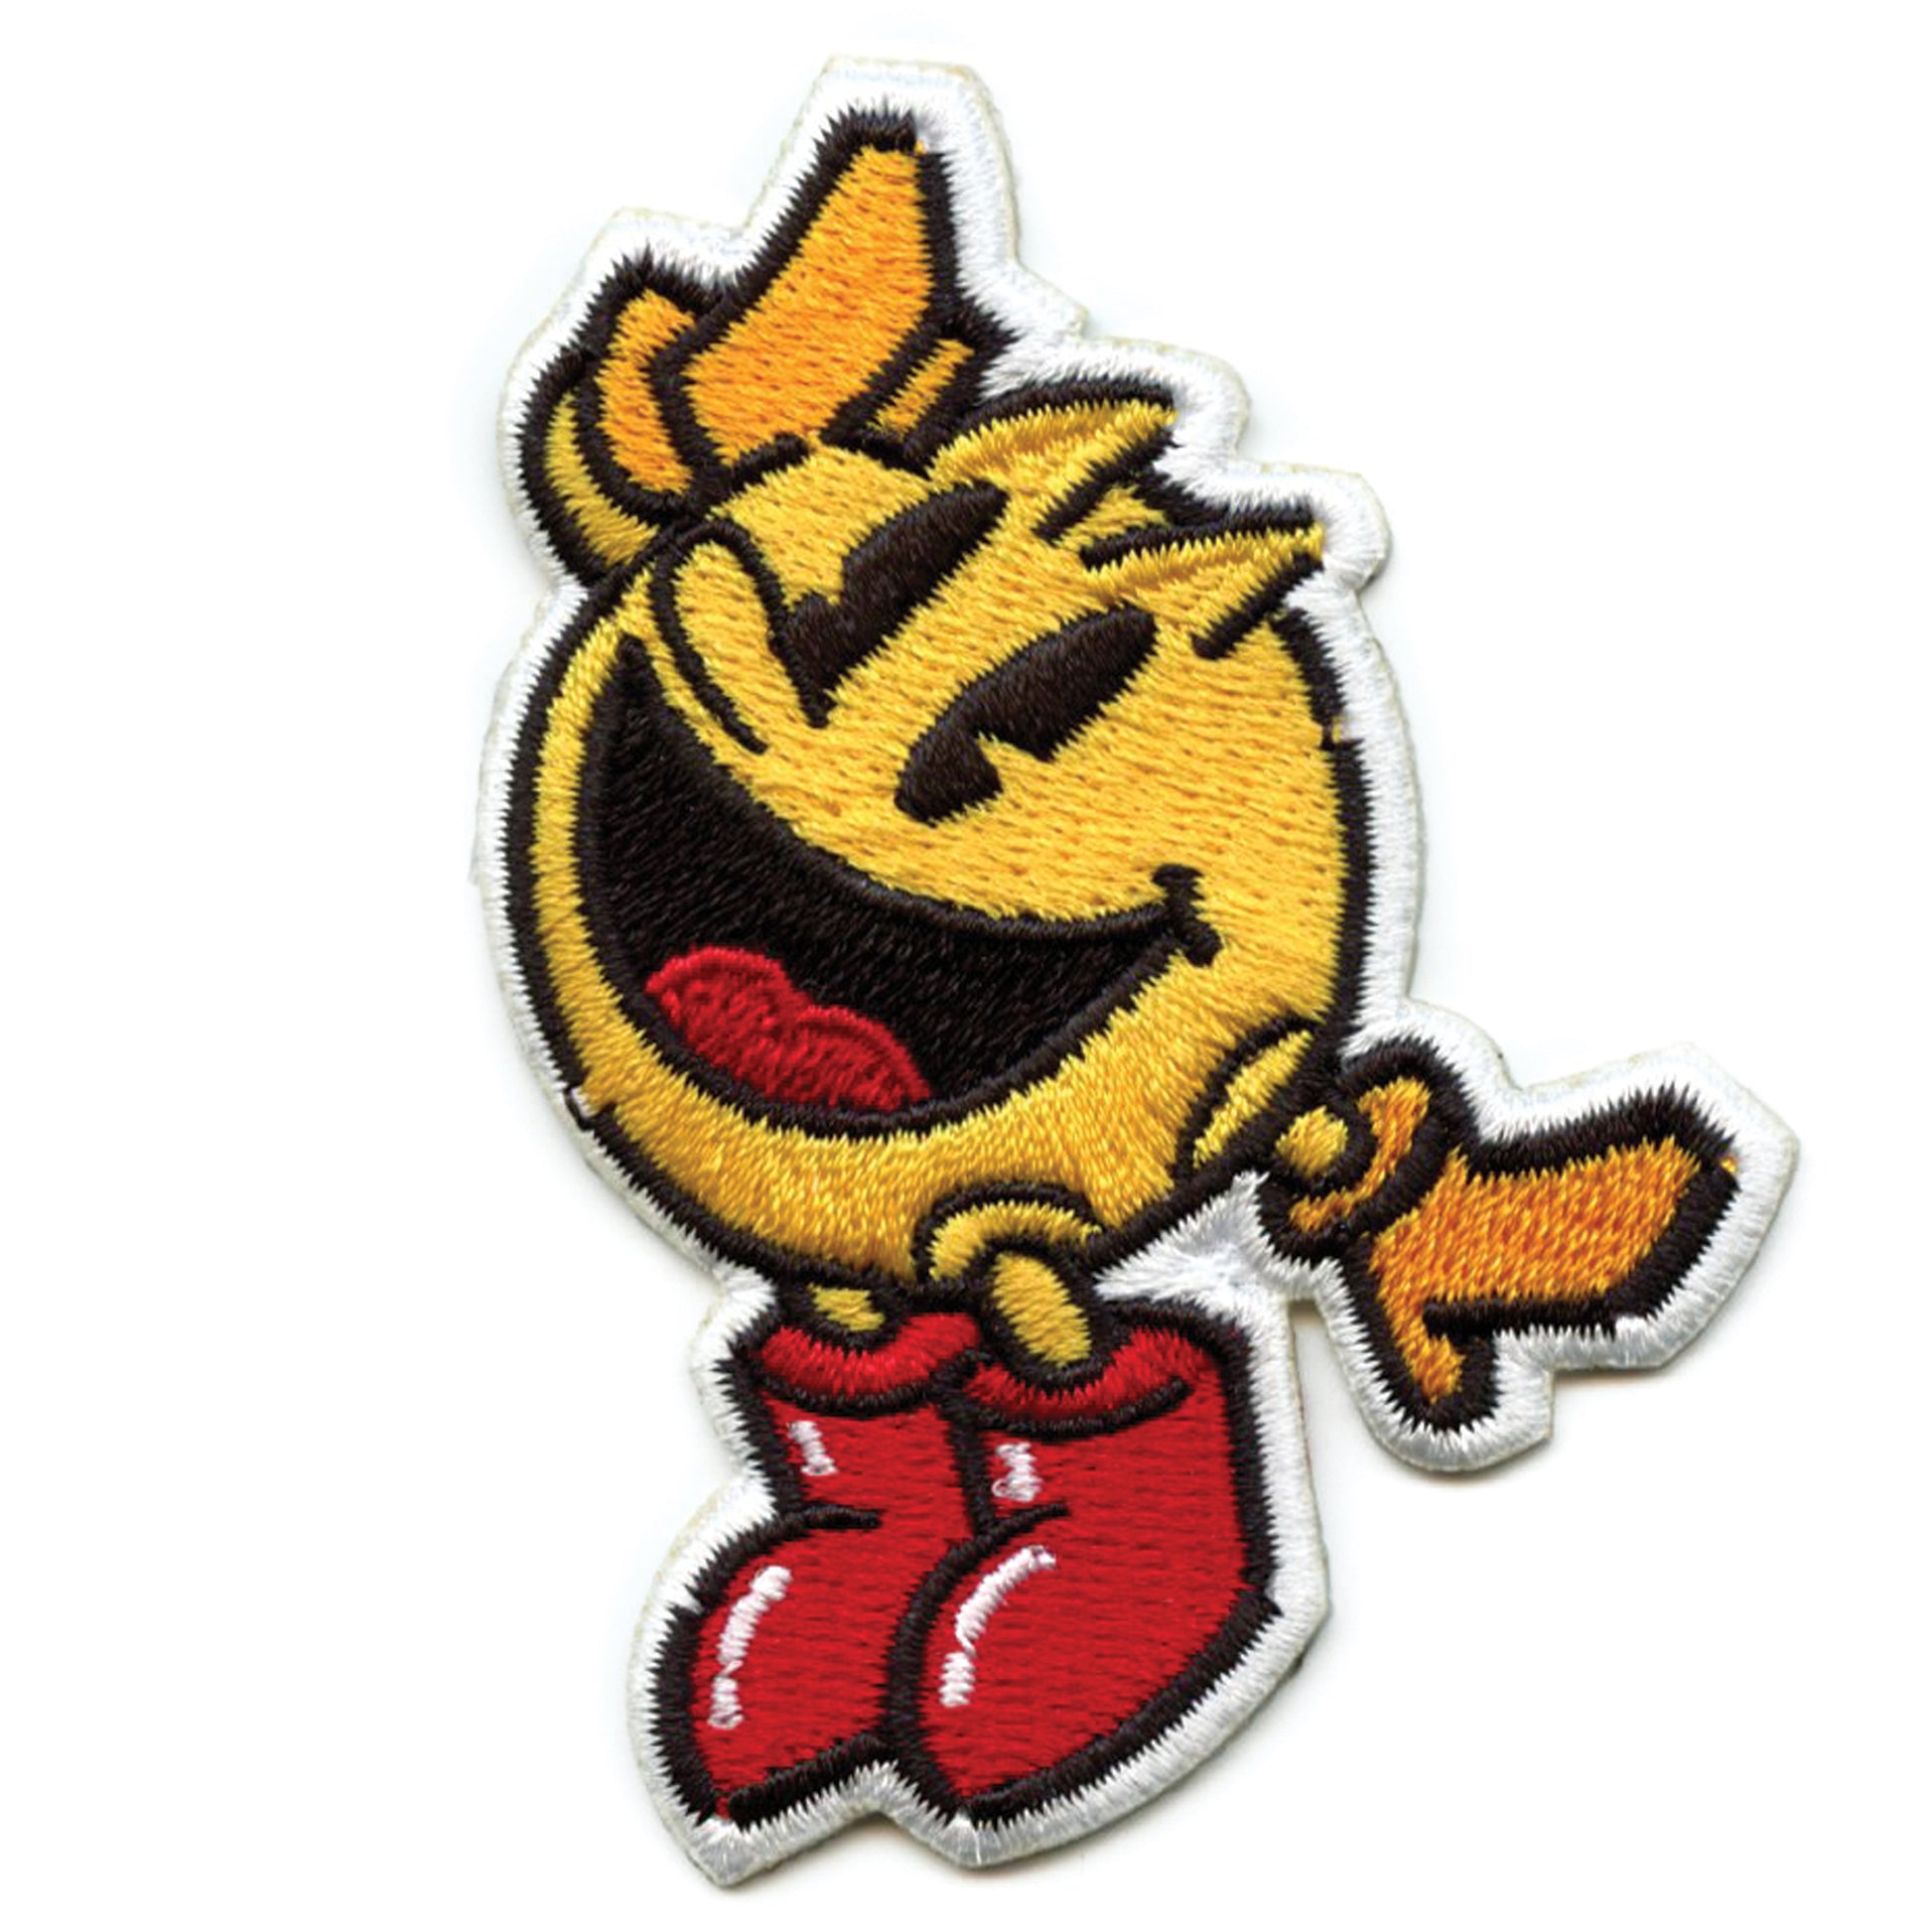 PAC-MAN Classic Illustration Jumping Alt Patch Arcade Gaming Embroidered Iron on